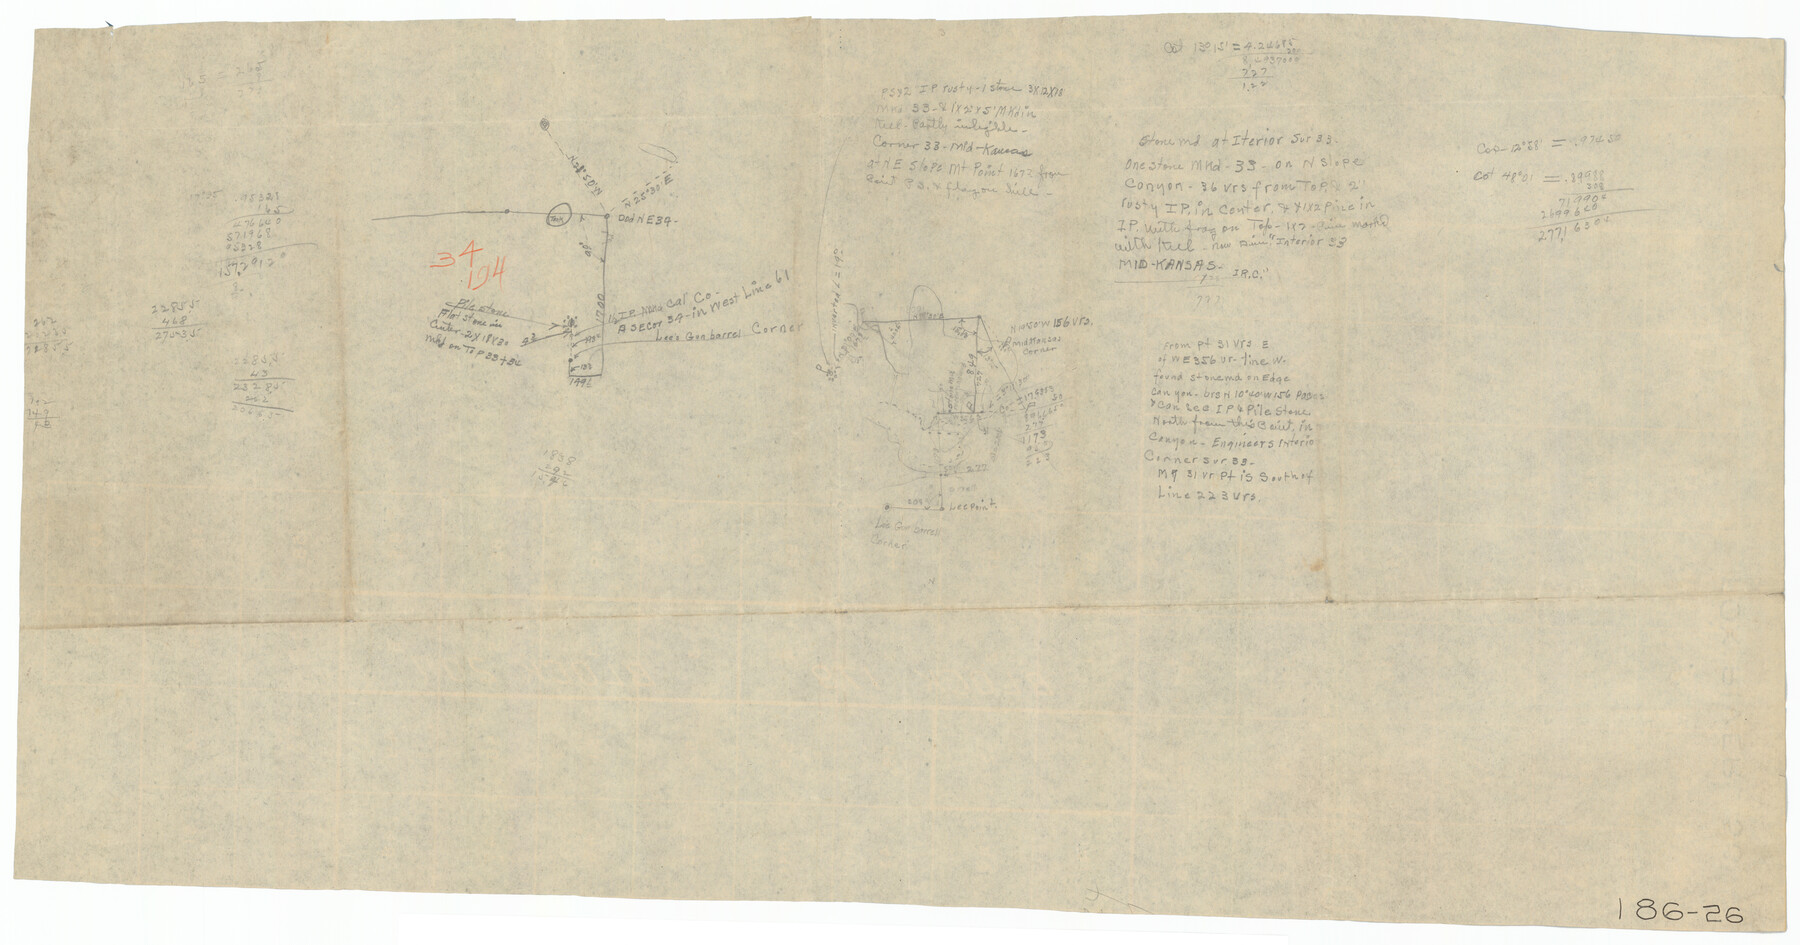 91663, [Pencil sketch and calculations regarding section 34, Block 194], Twichell Survey Records